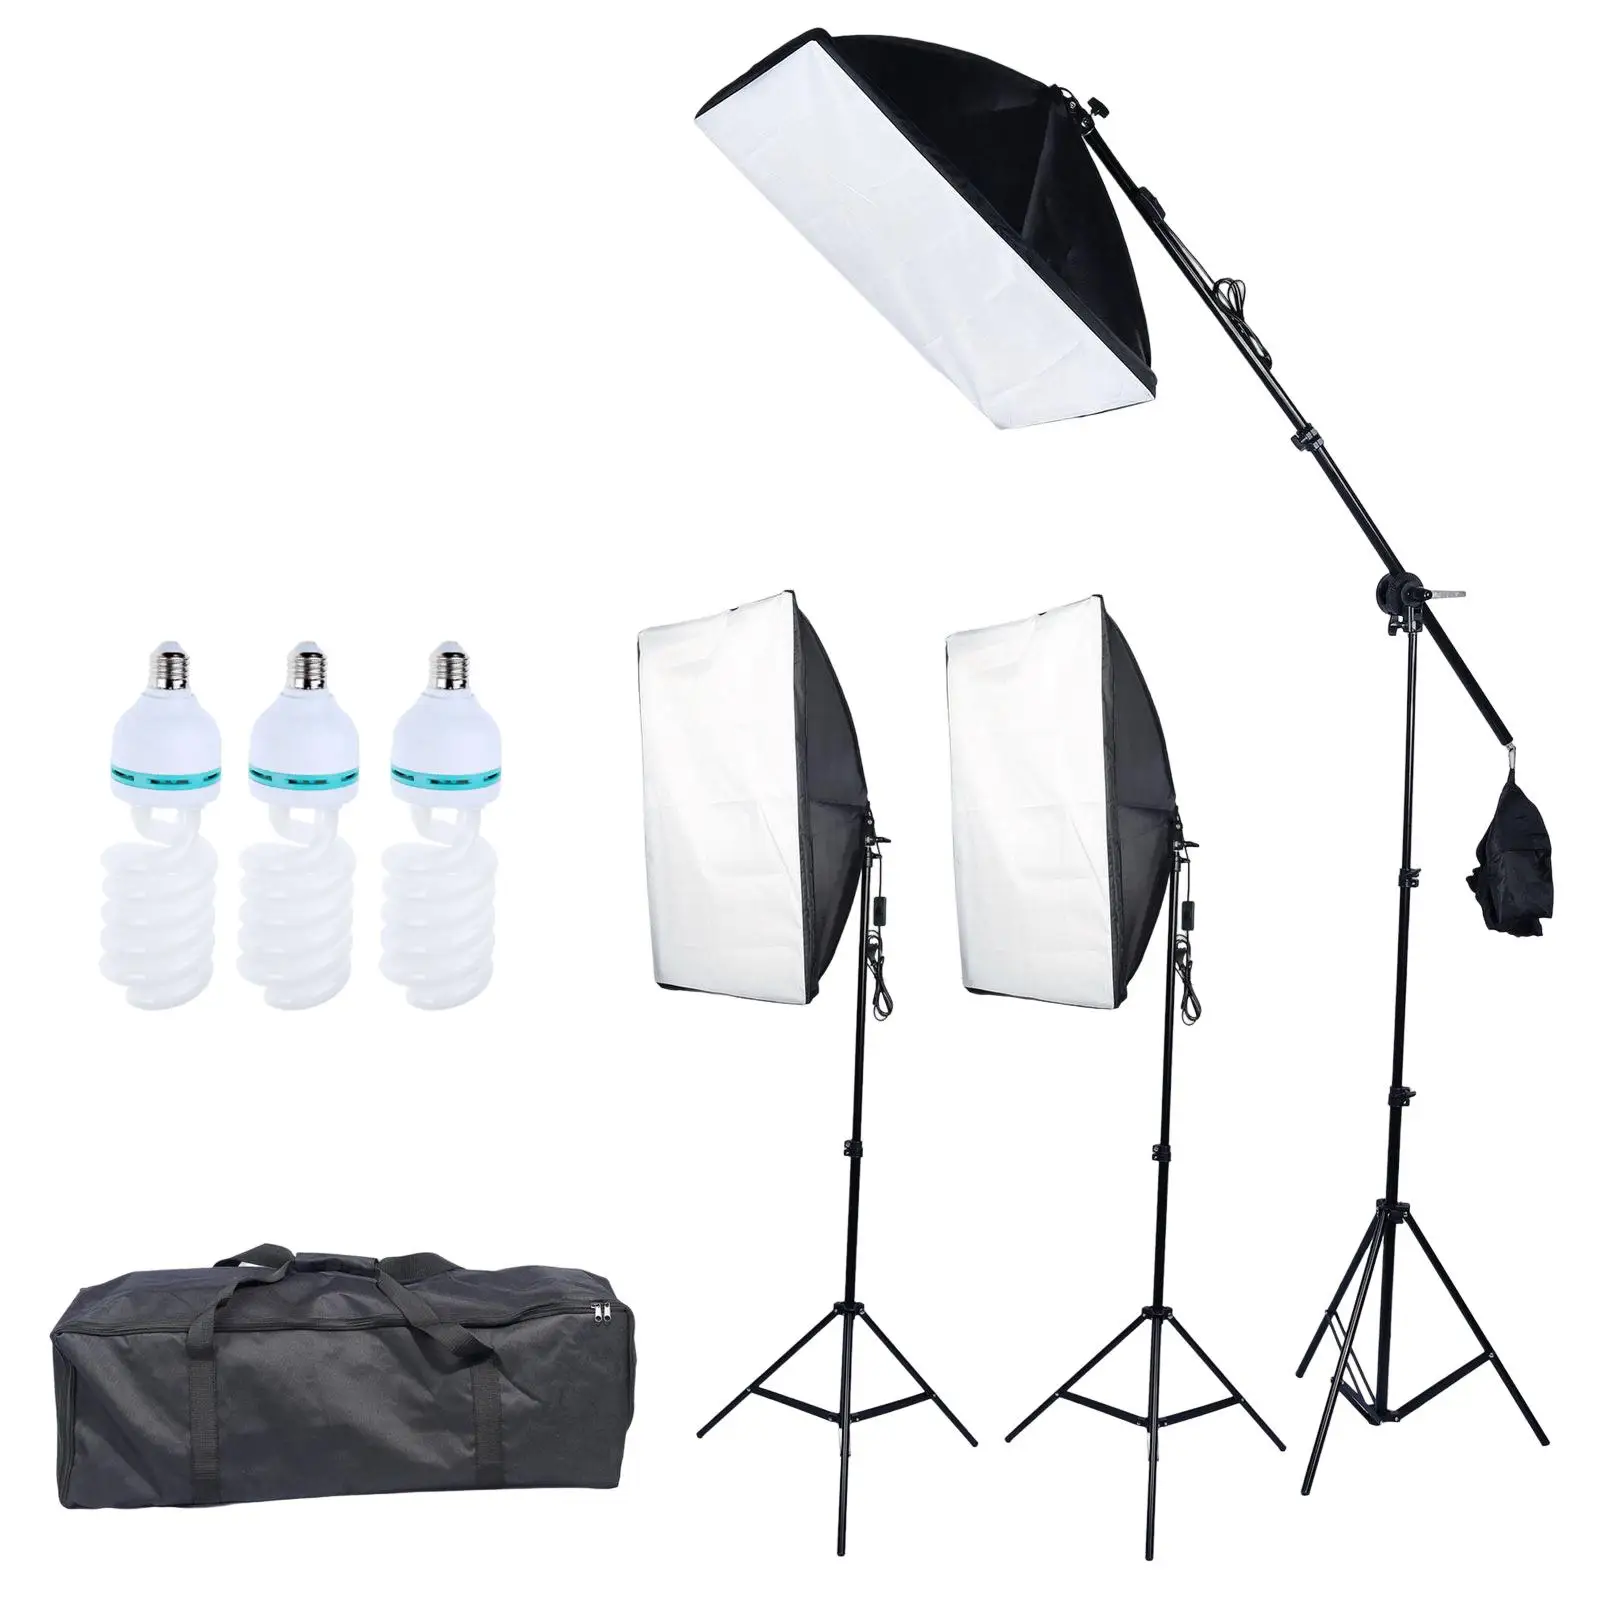 14Pcs Photography Lighting Kit Adjustable Light Stand Complete with Storage Bag Cross Arm Softbox Lighting Kit for Video Product